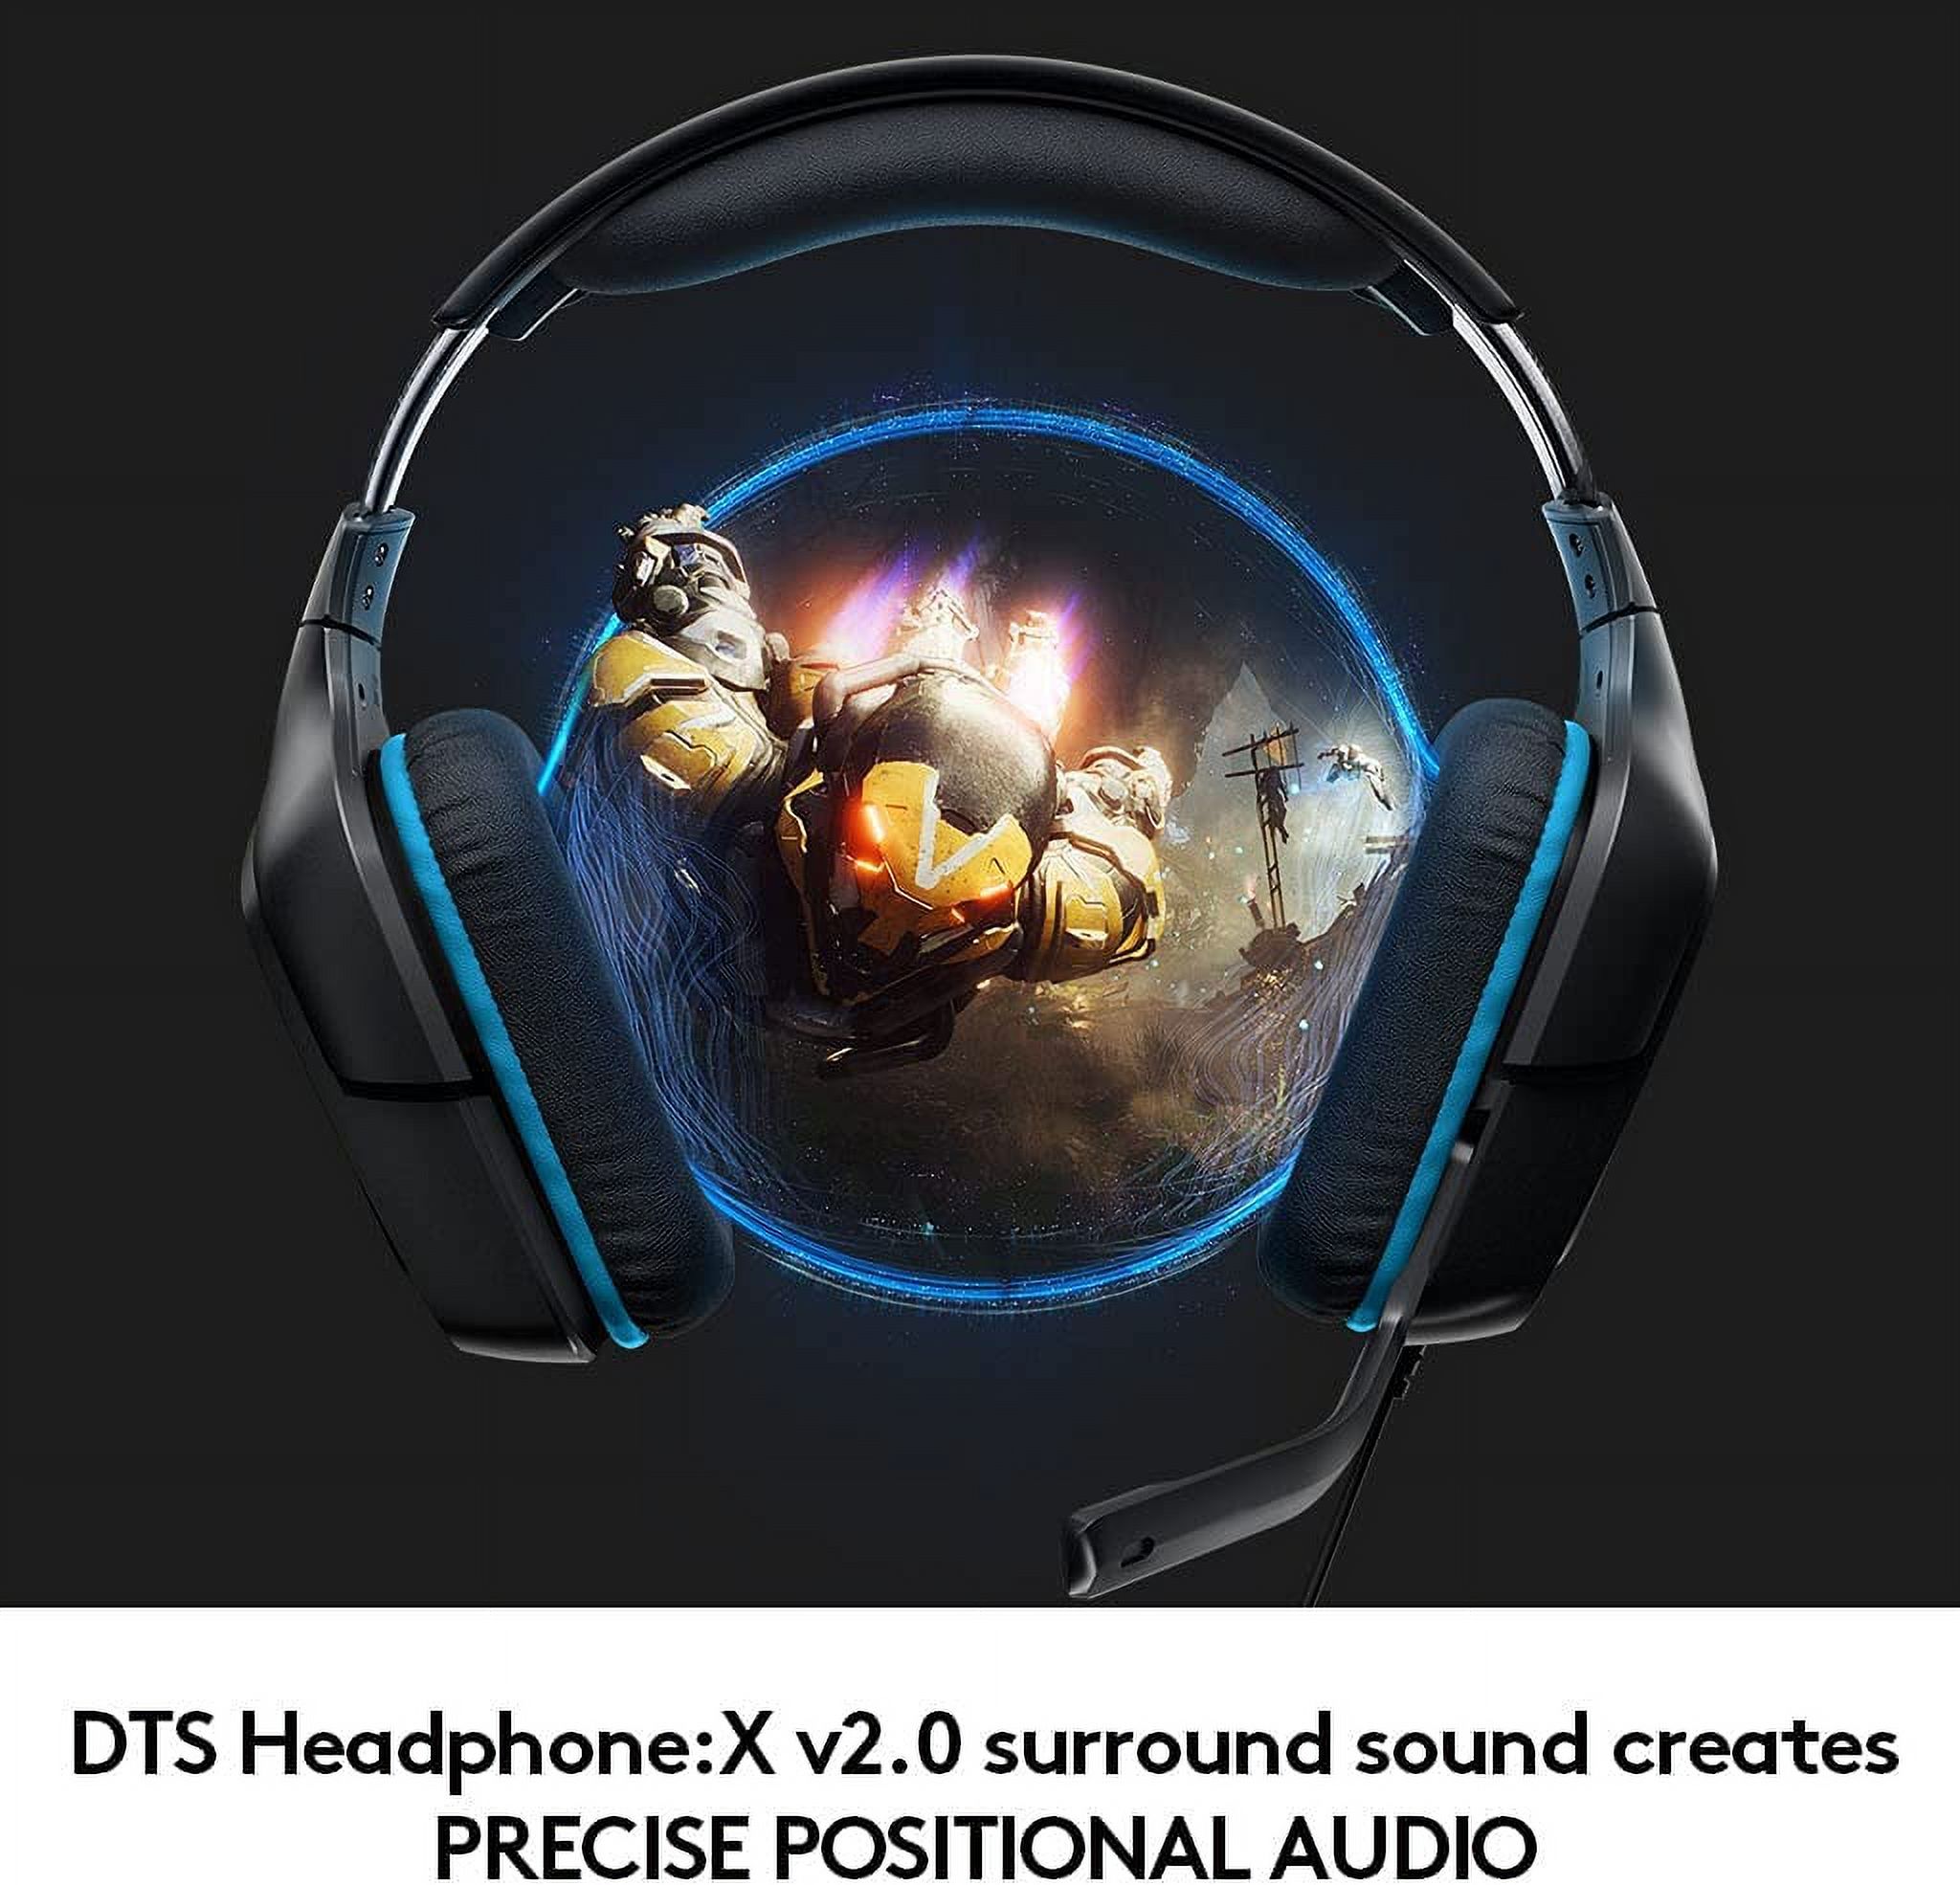 Logitech G432 Wired Gaming Headset, 7.1 Surround Sound, USB and 3.5 mm Jack, Black - image 2 of 7